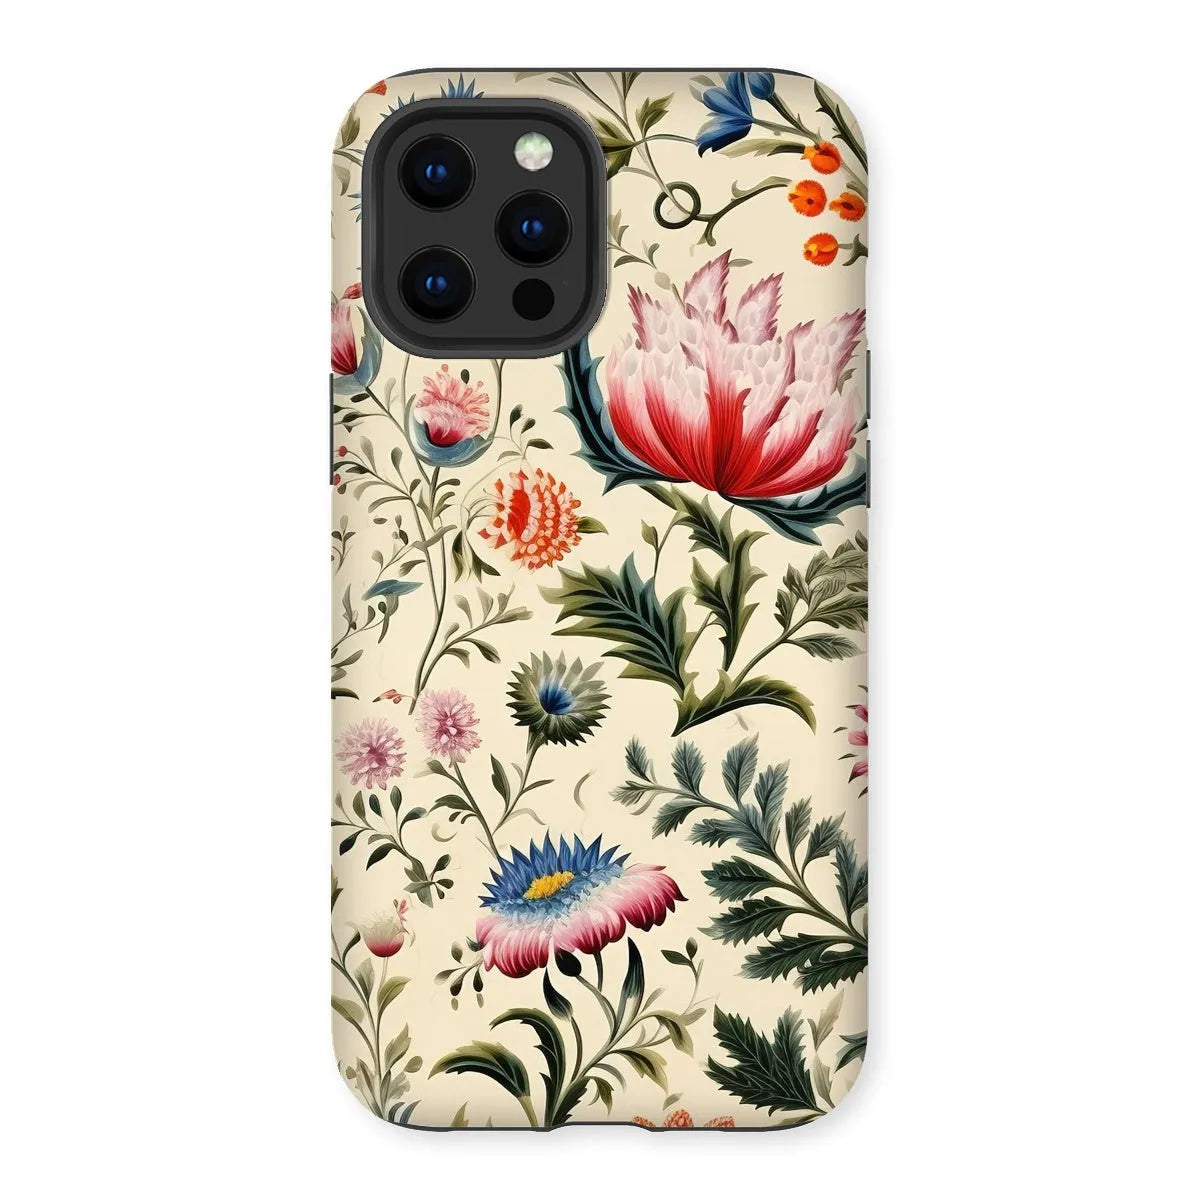 Wildflower Hoopla - Floral Garden Aesthetic Phone Case - Iphone 13 Pro Max / Matte - Mobile Phone Cases - Aesthetic Art